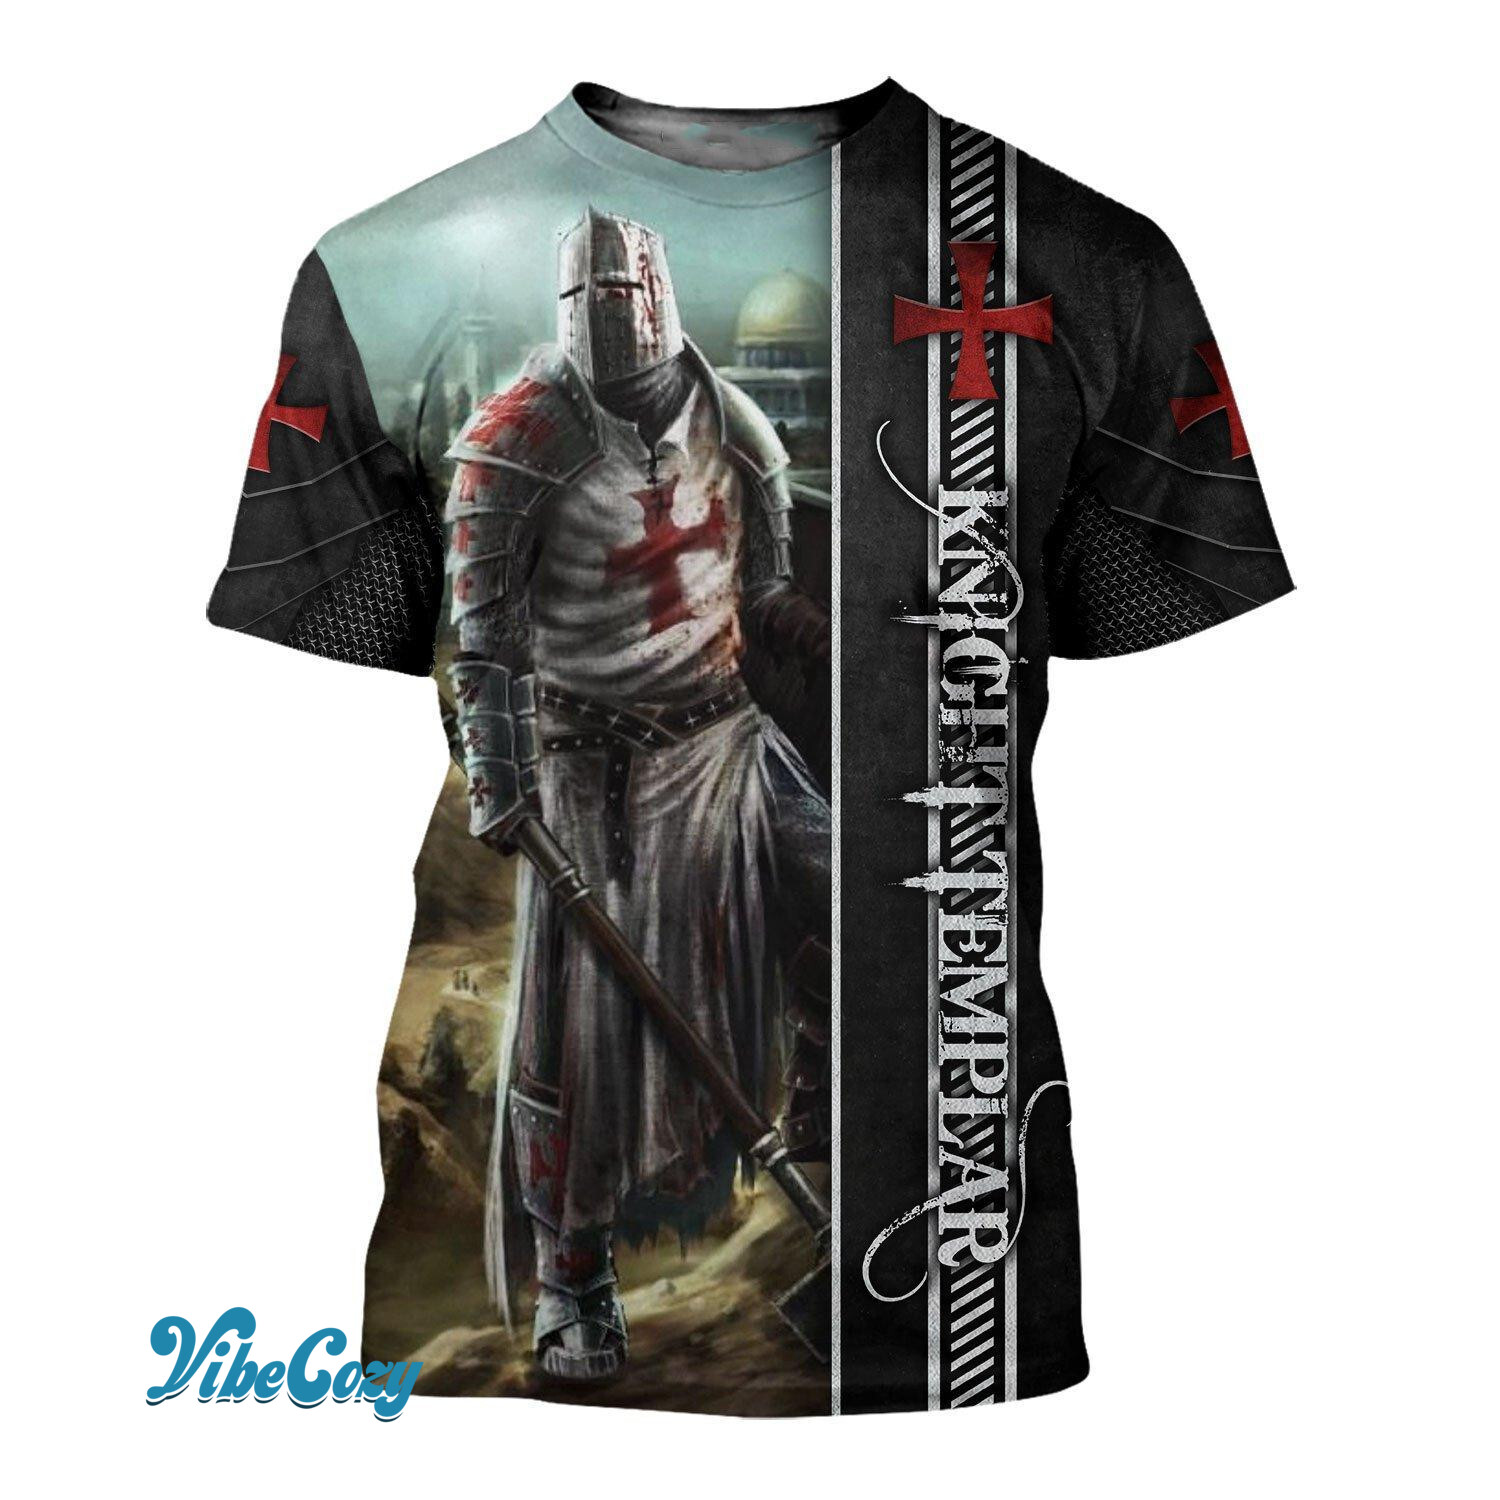 Knight Templar 3D All Over Printed Shirt Hoodie MP920